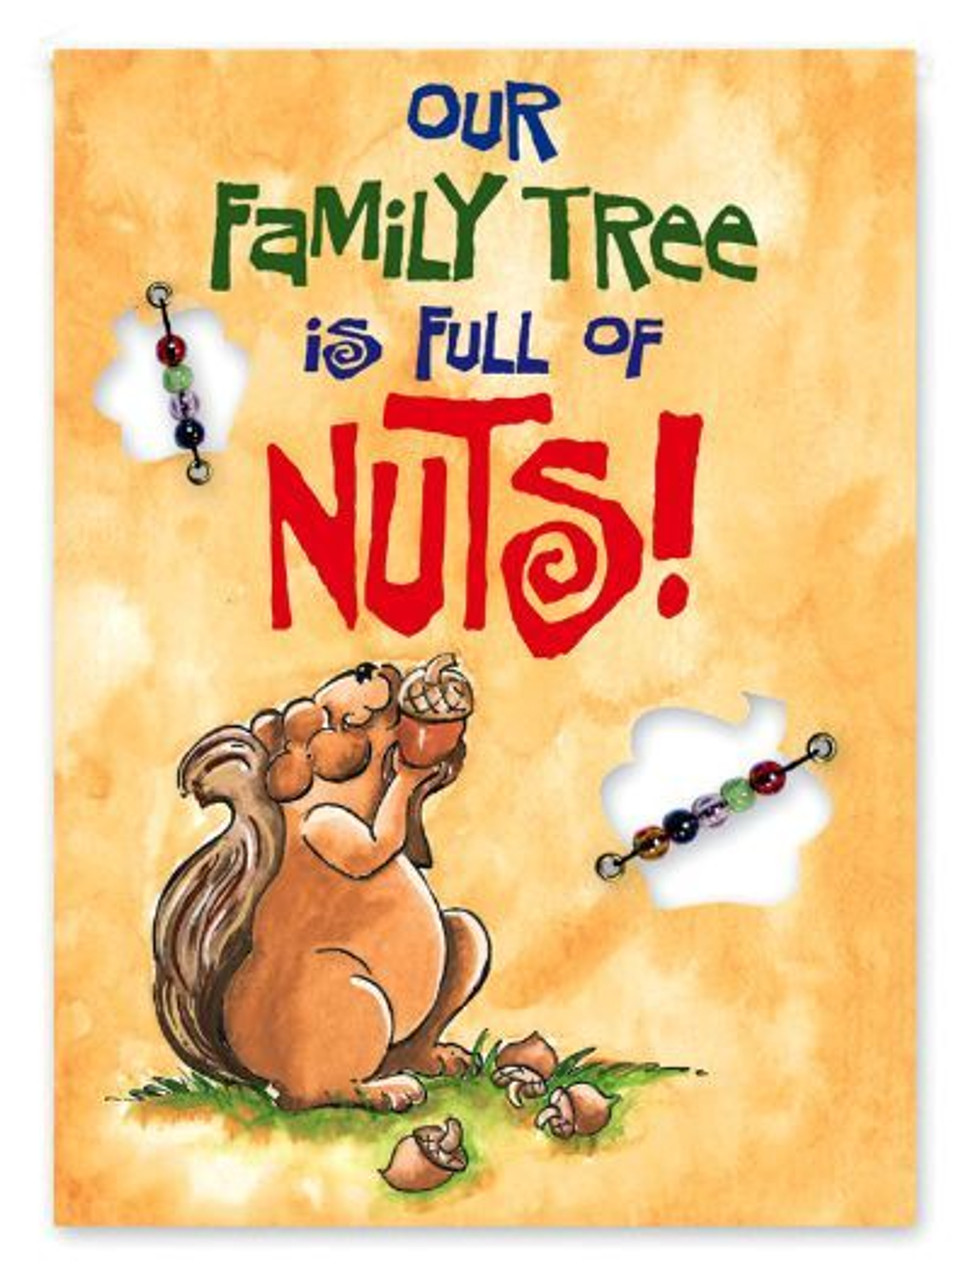 Our Family is Tree is full of Nuts